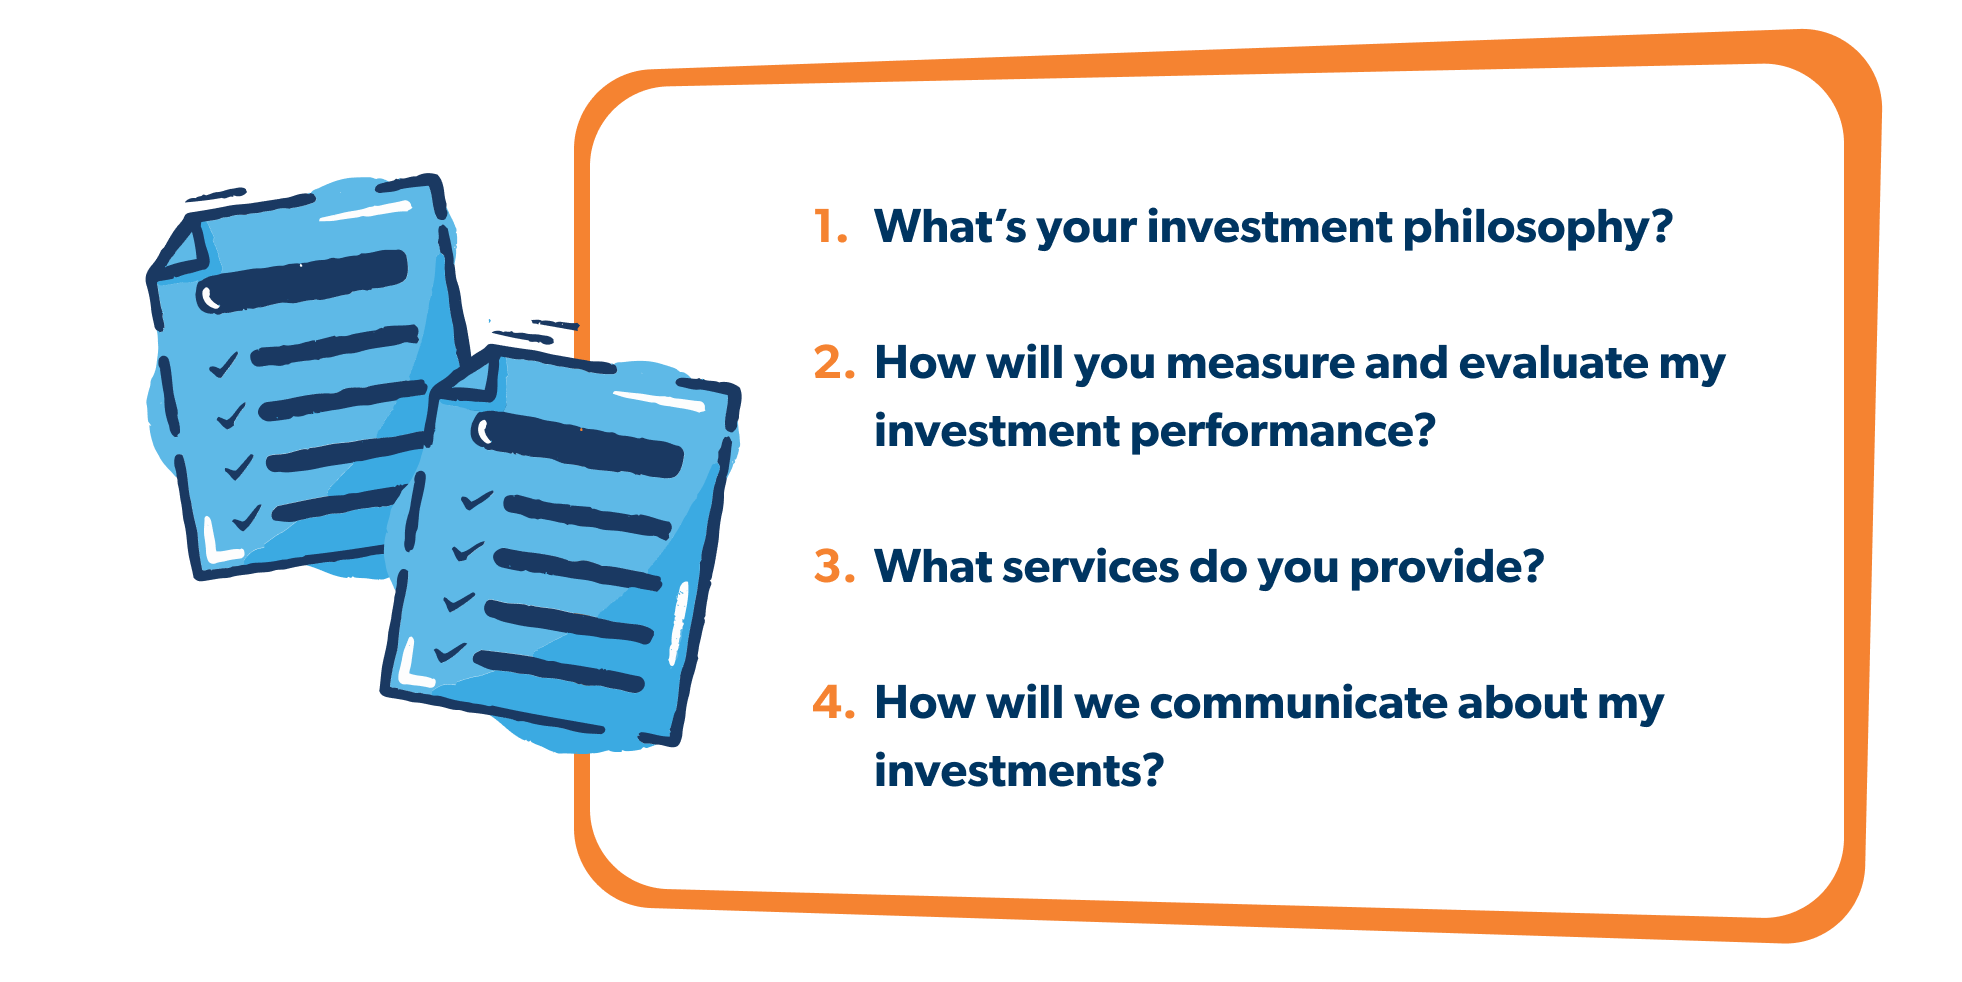 What's your investment philosophy? How will you measure and evaluate my investment performance? What services do you provide? How will we communicate about my investments?